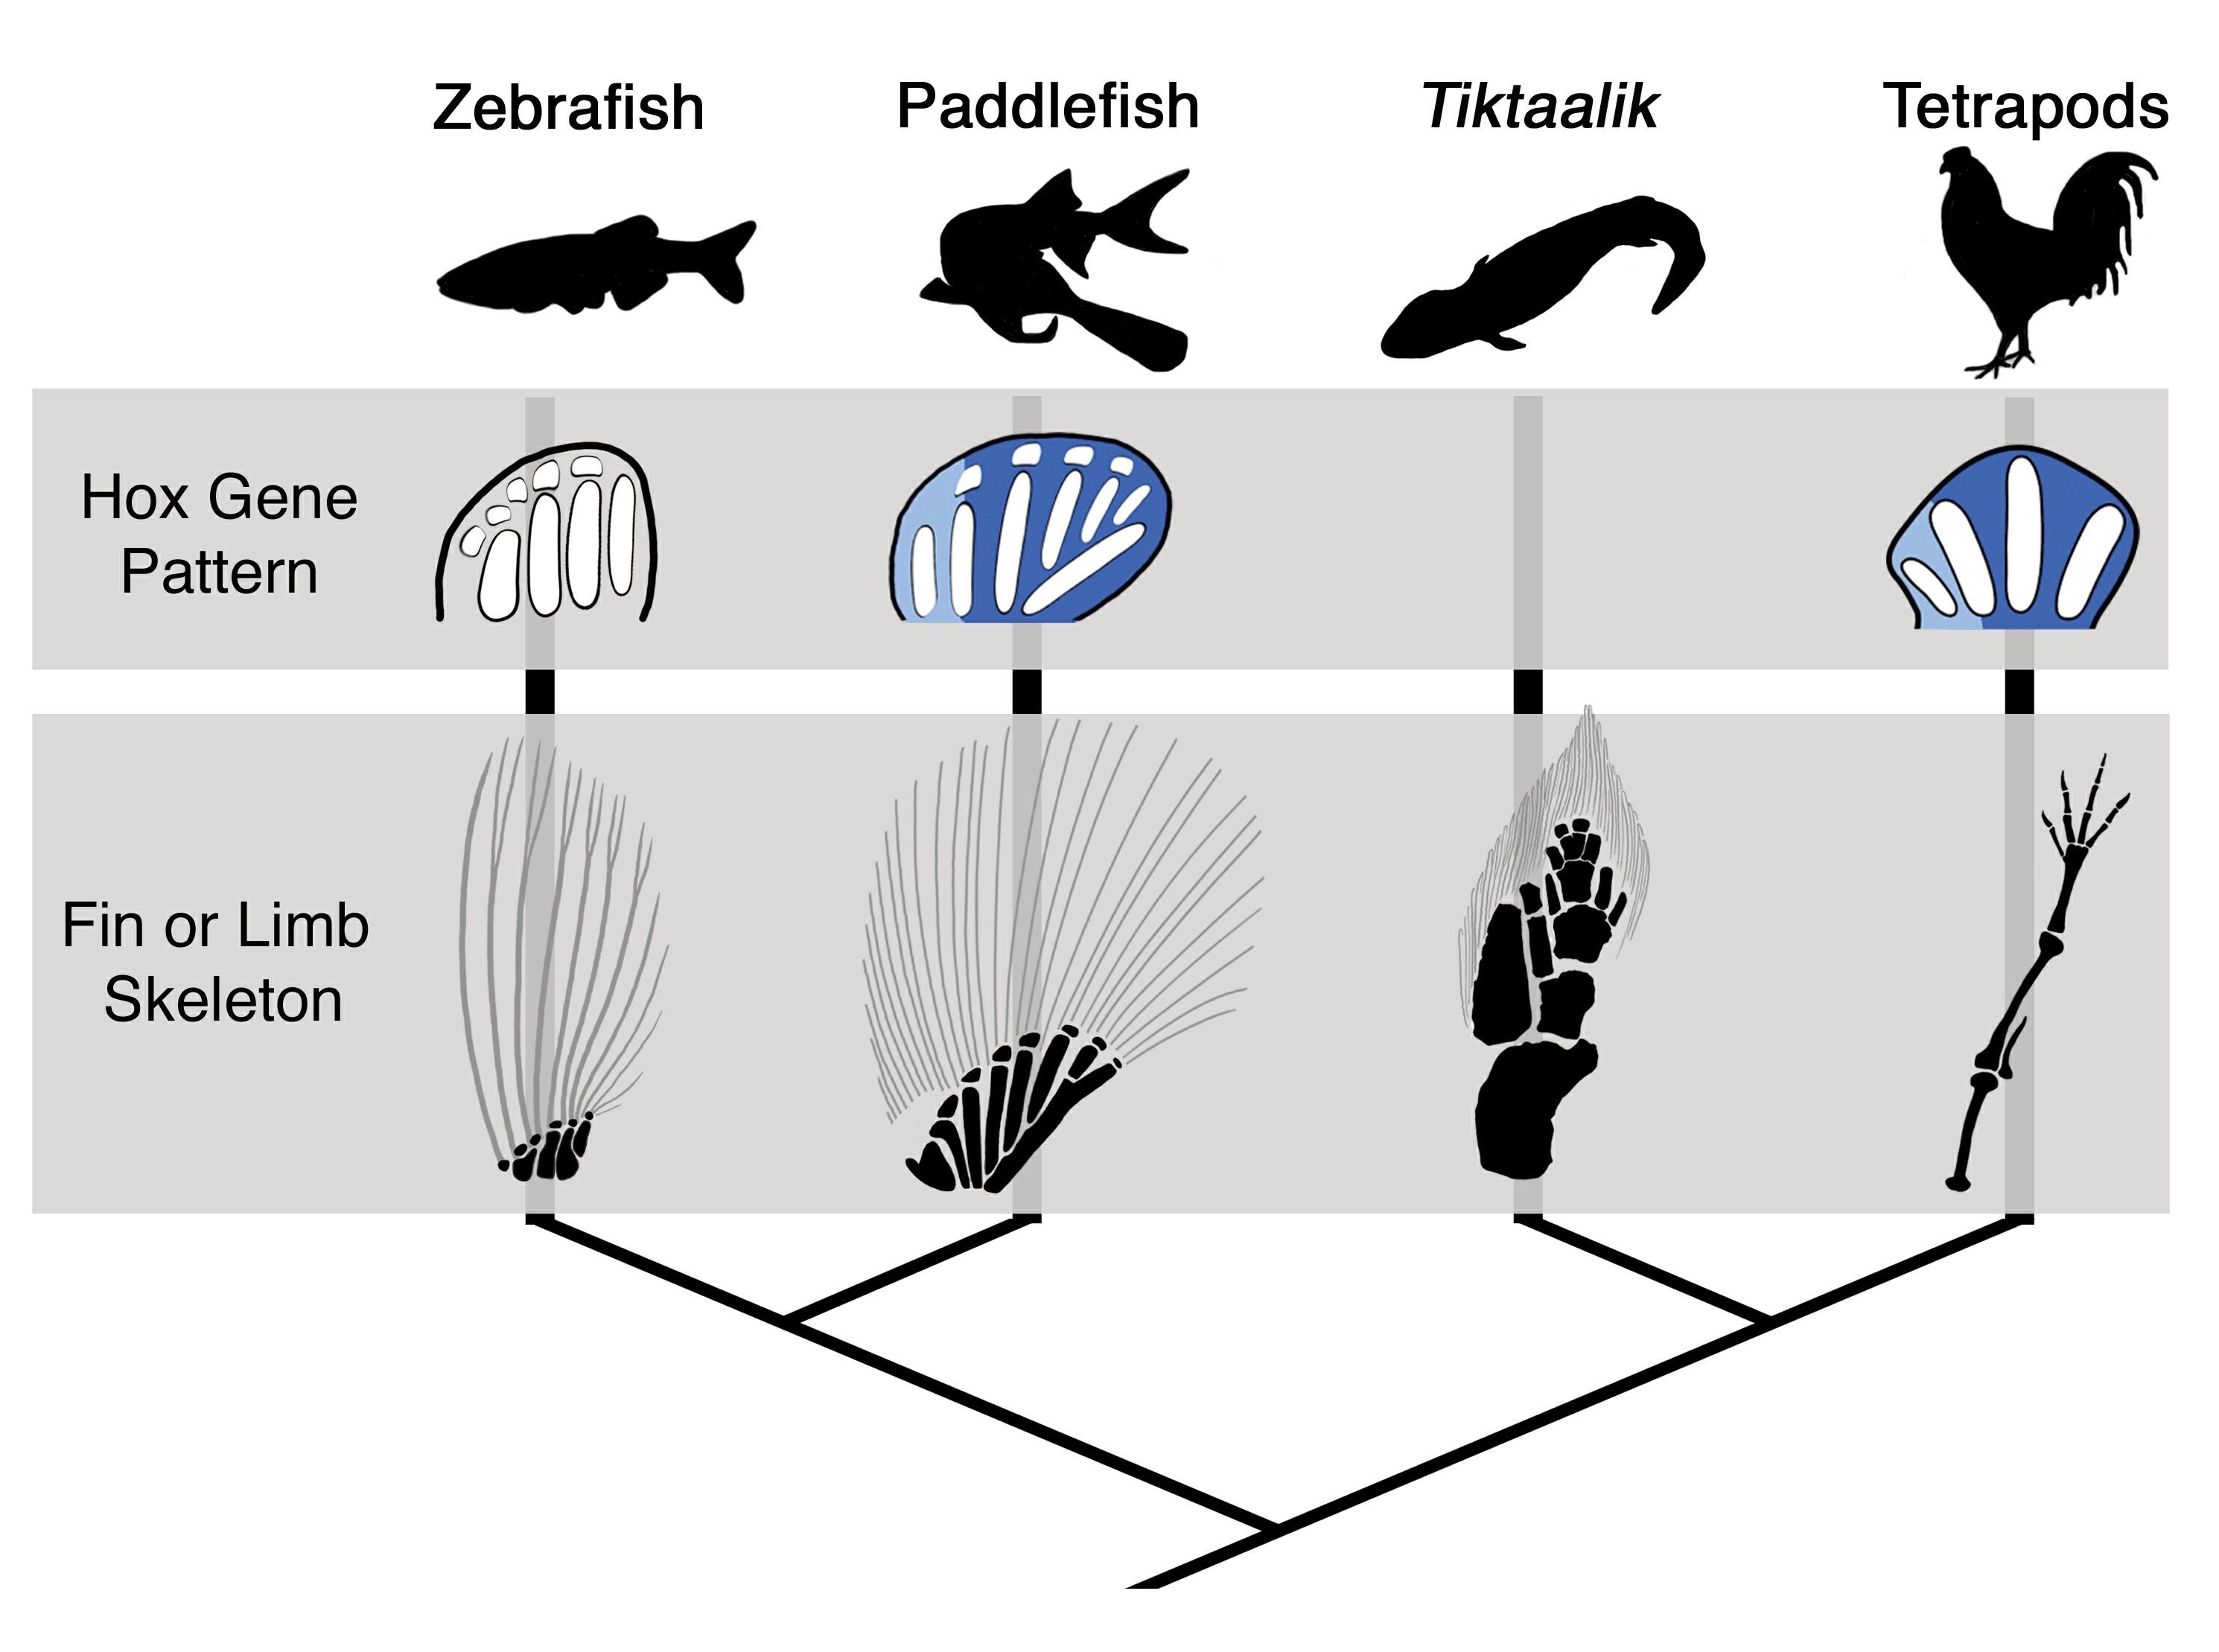 Hox Gene Research And New Data On How Fish Grew Feet | Science 